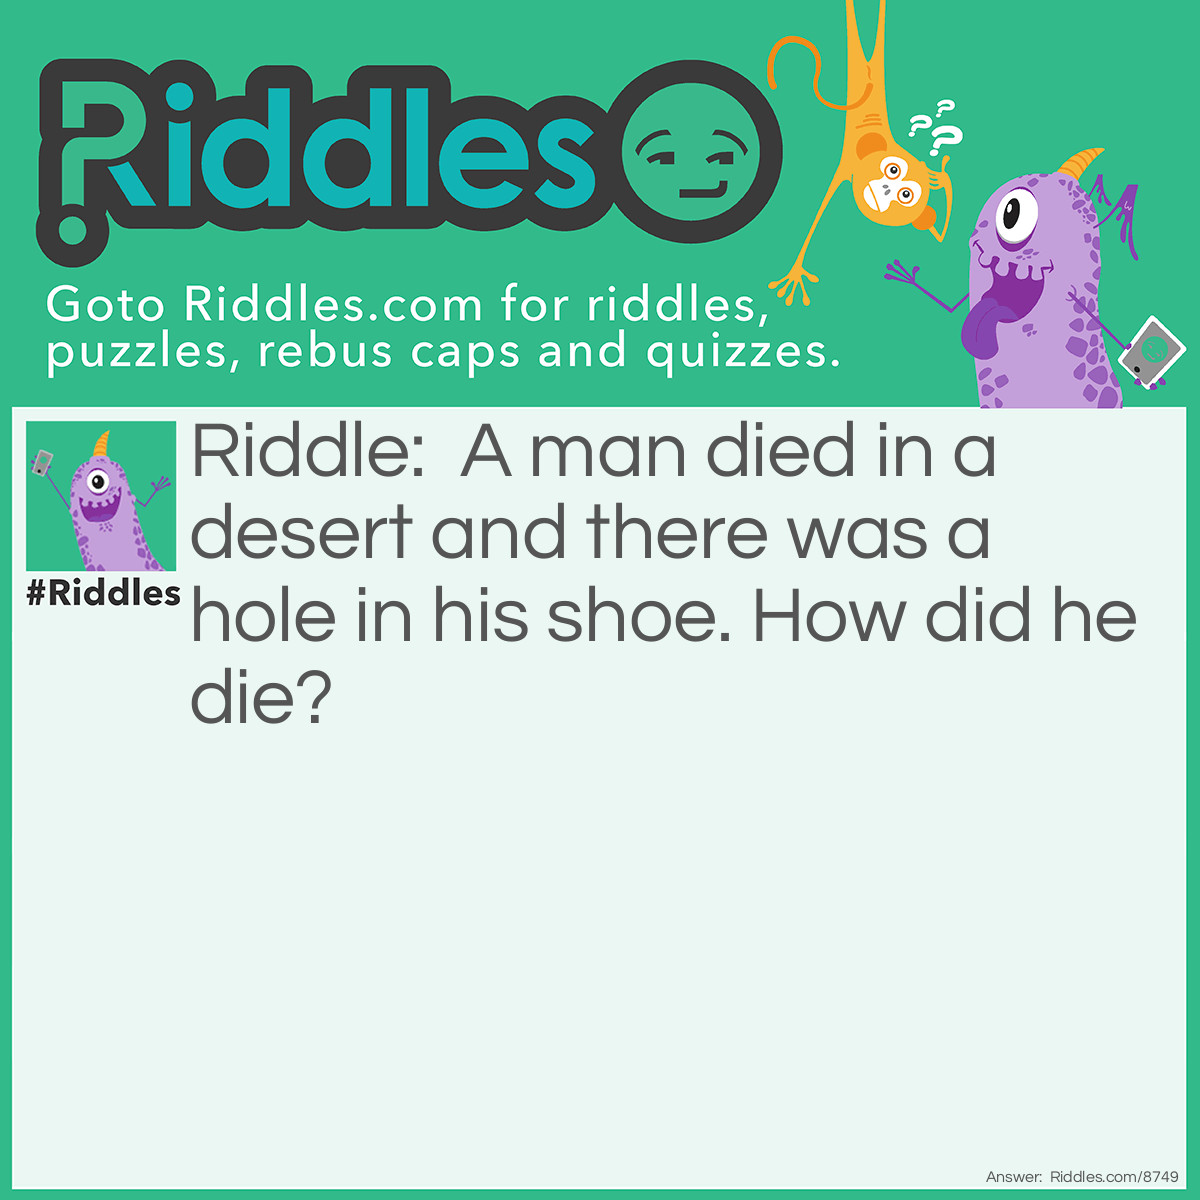 Riddle: A man died in a desert and there was a hole in his shoe. How did he die? Answer: He was an astronaut on the moon! (THE MOON IS A DESERT)